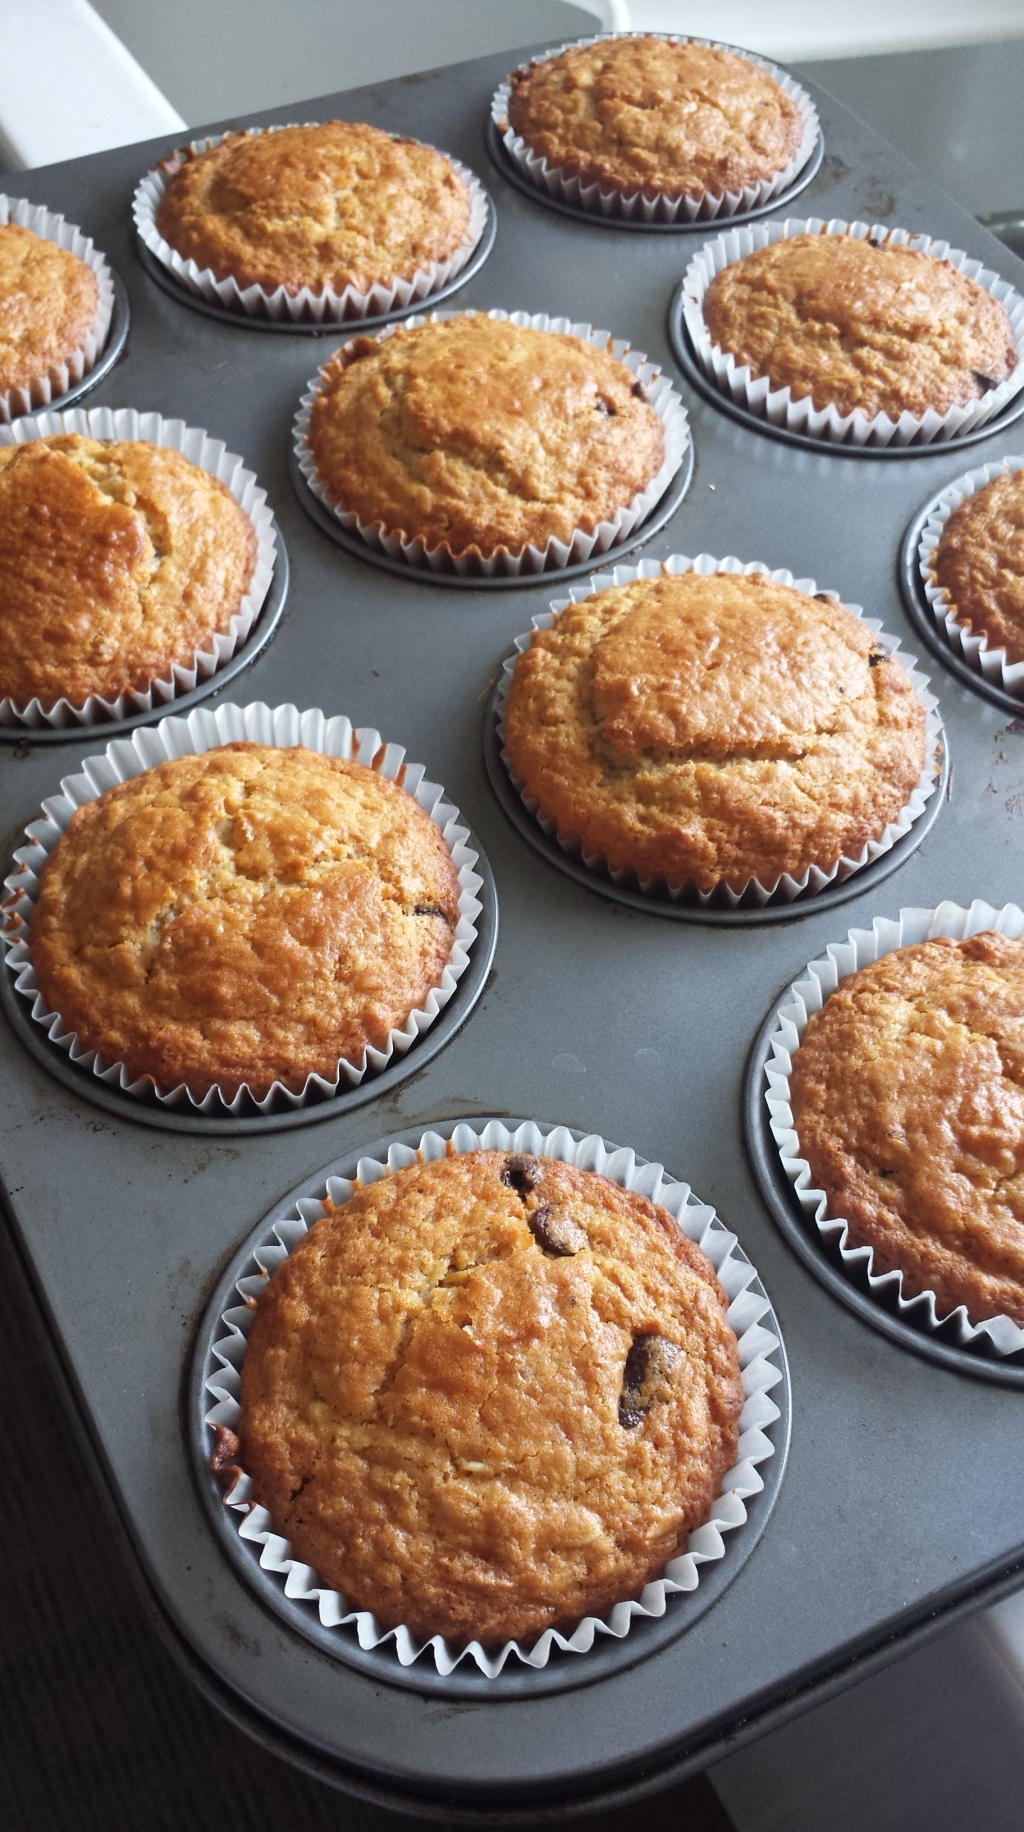 Healthy-ish Oatmeal Chocolate Chip Muffins.